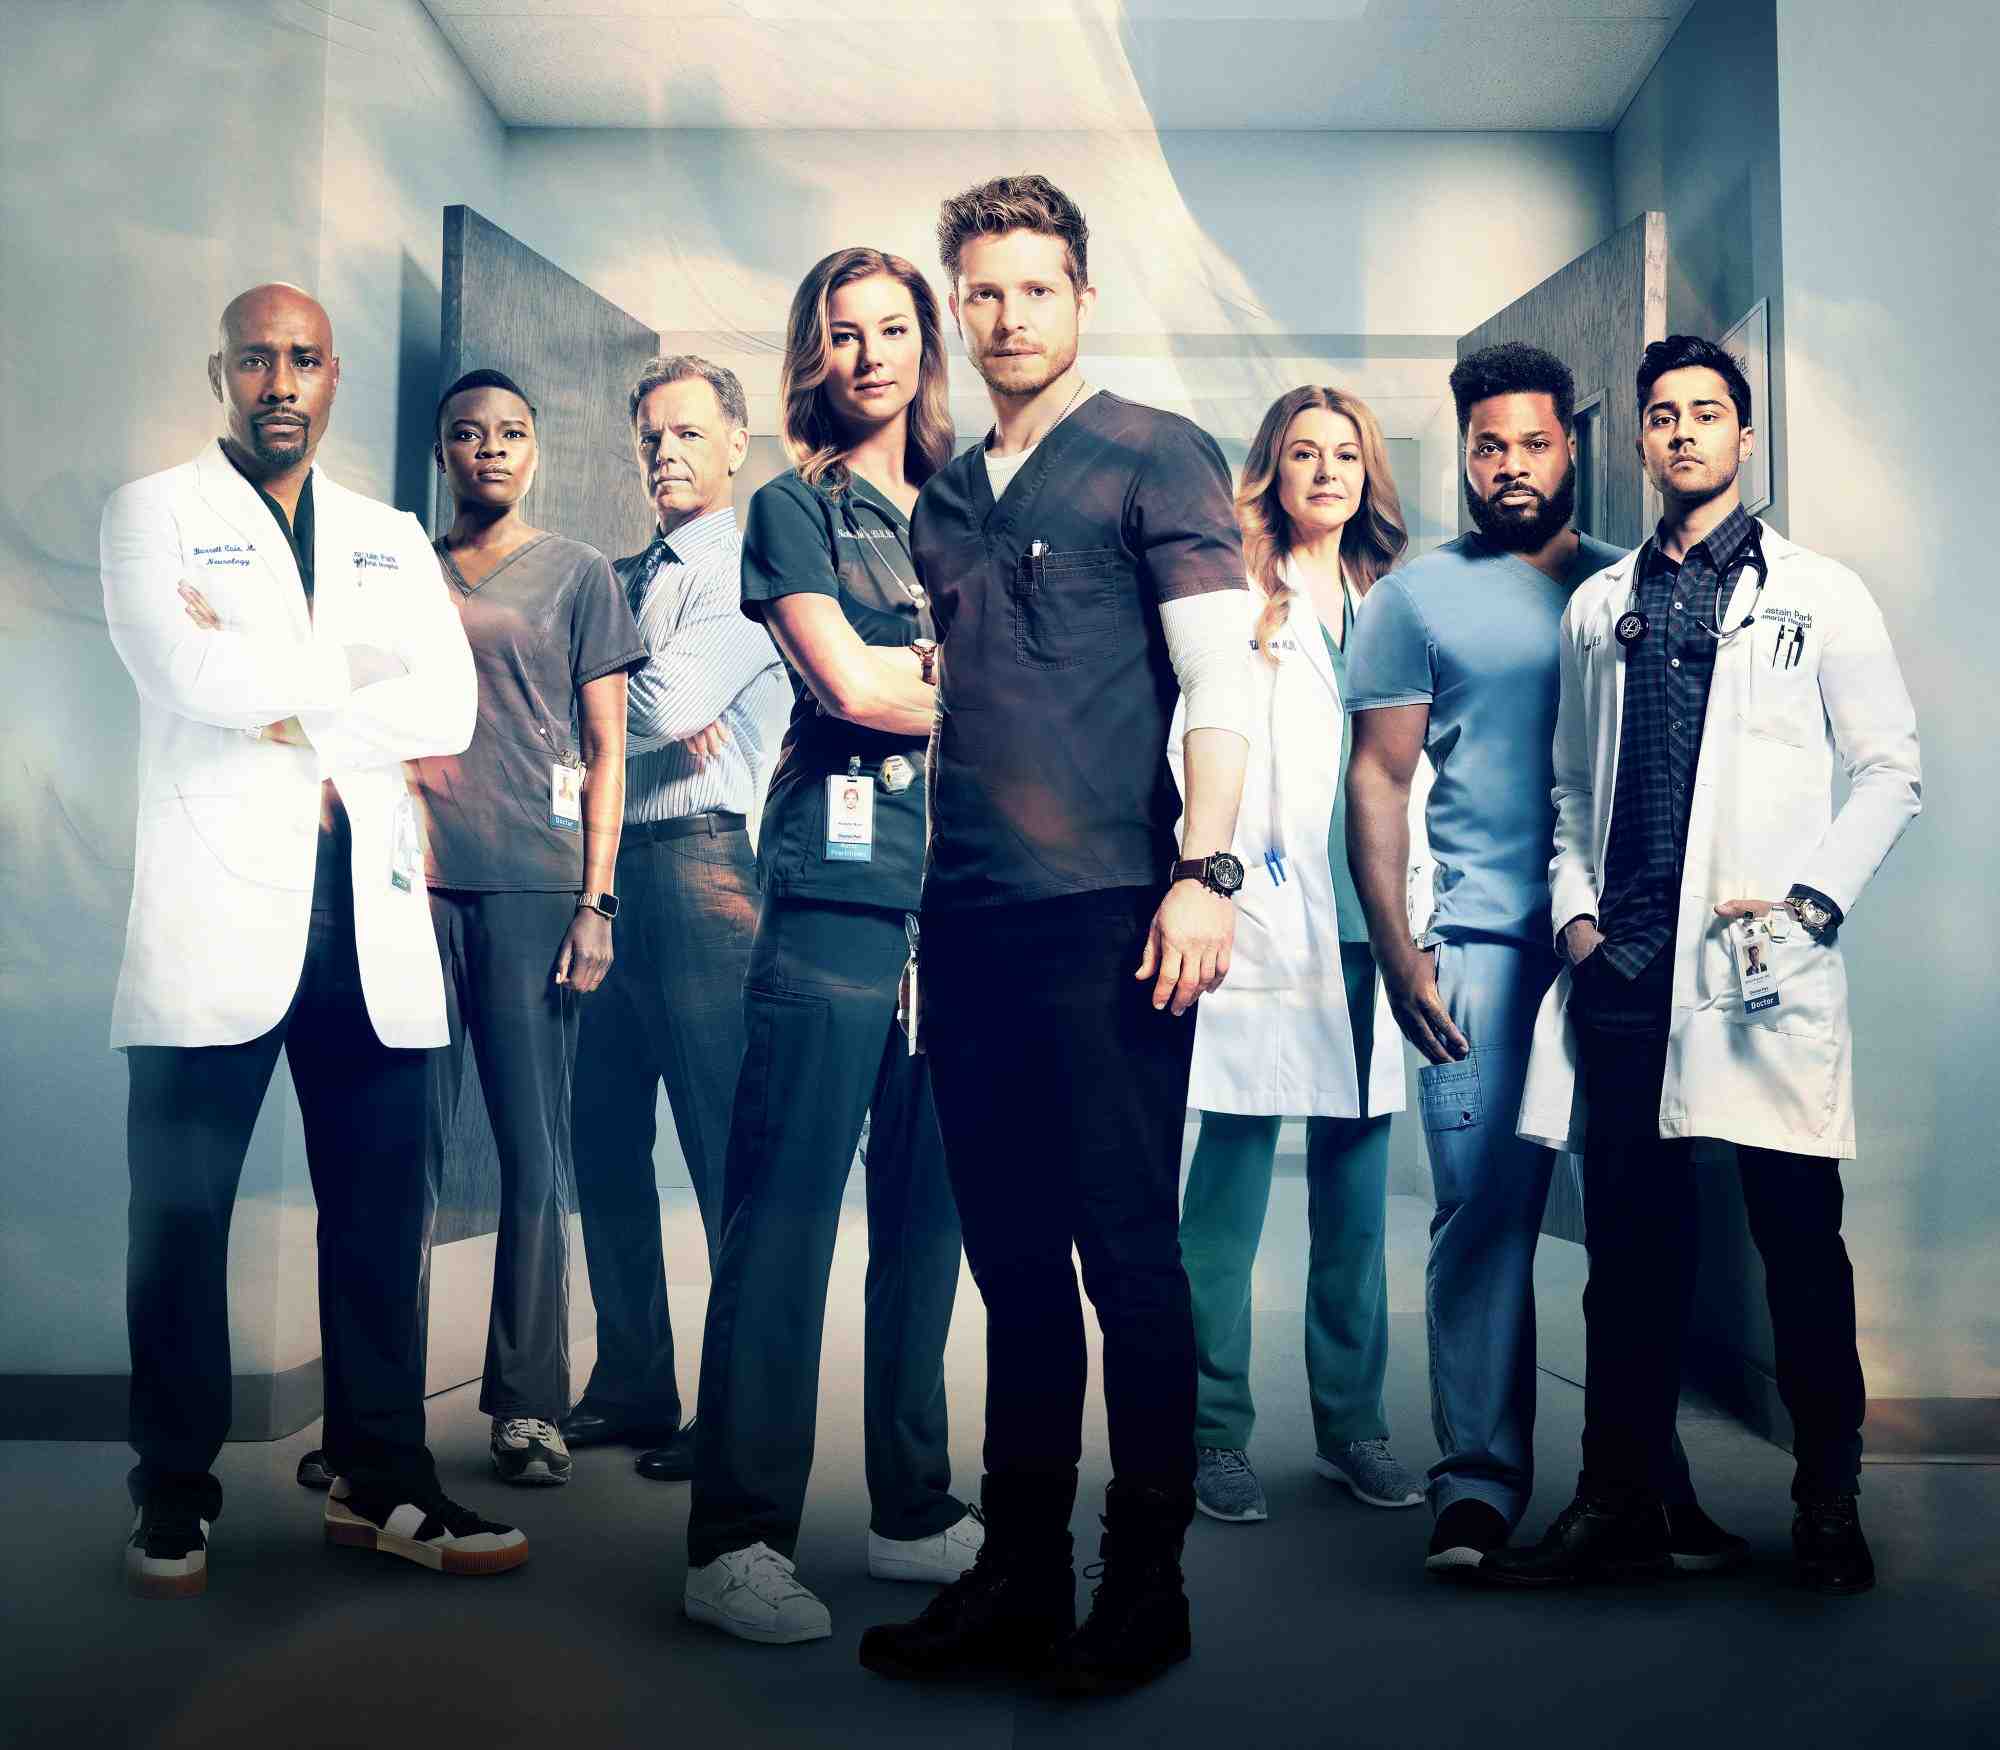 Join the resident cast post-cancellation as they scrub up from medical drama to diversely thrilling roles. ICU stalwarts to A-list stars revealed!